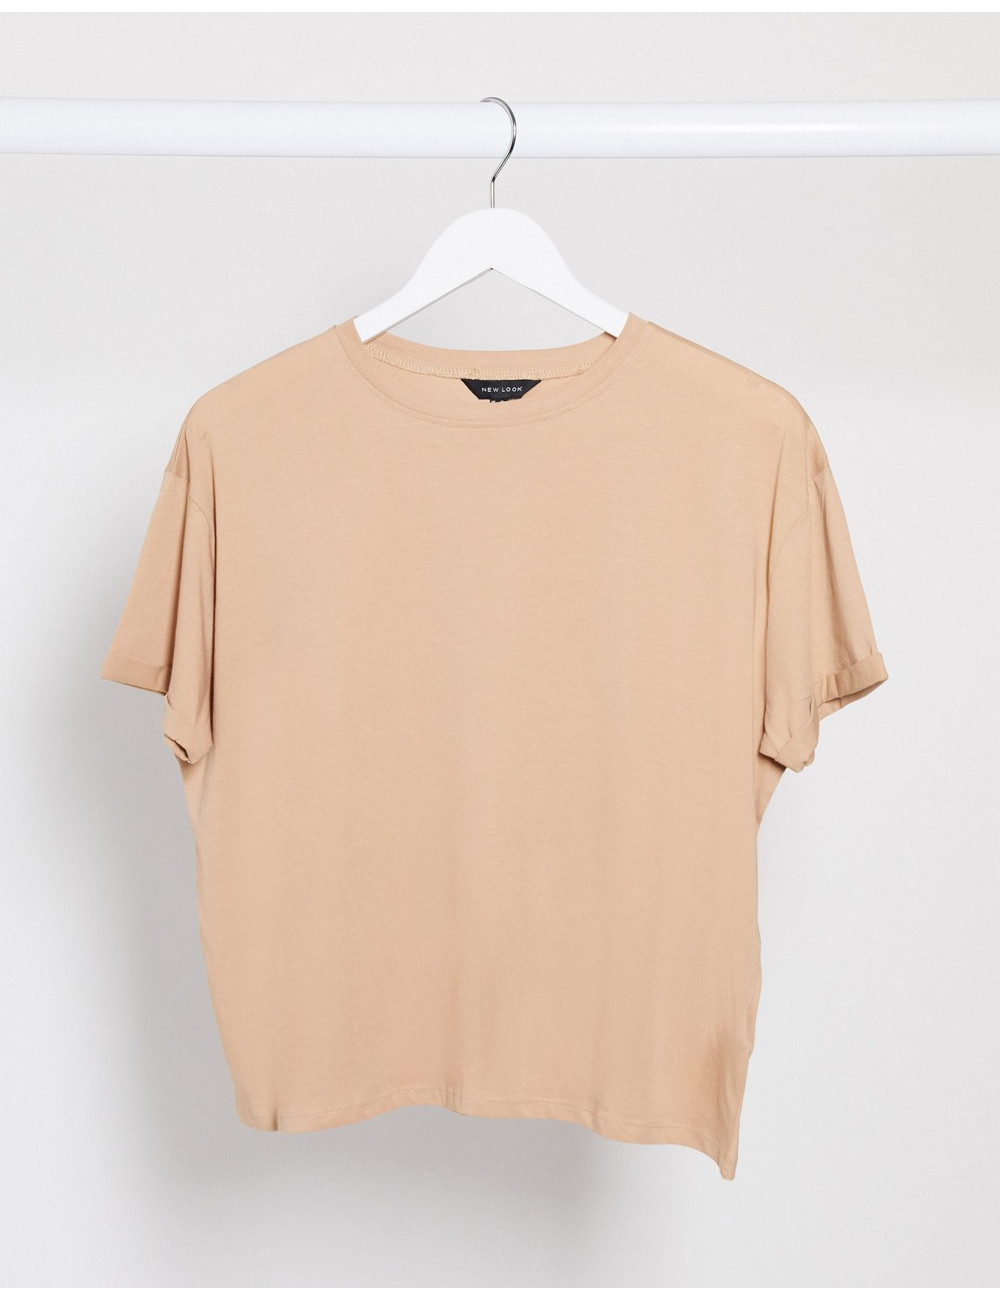 New Look boxy tee in camel